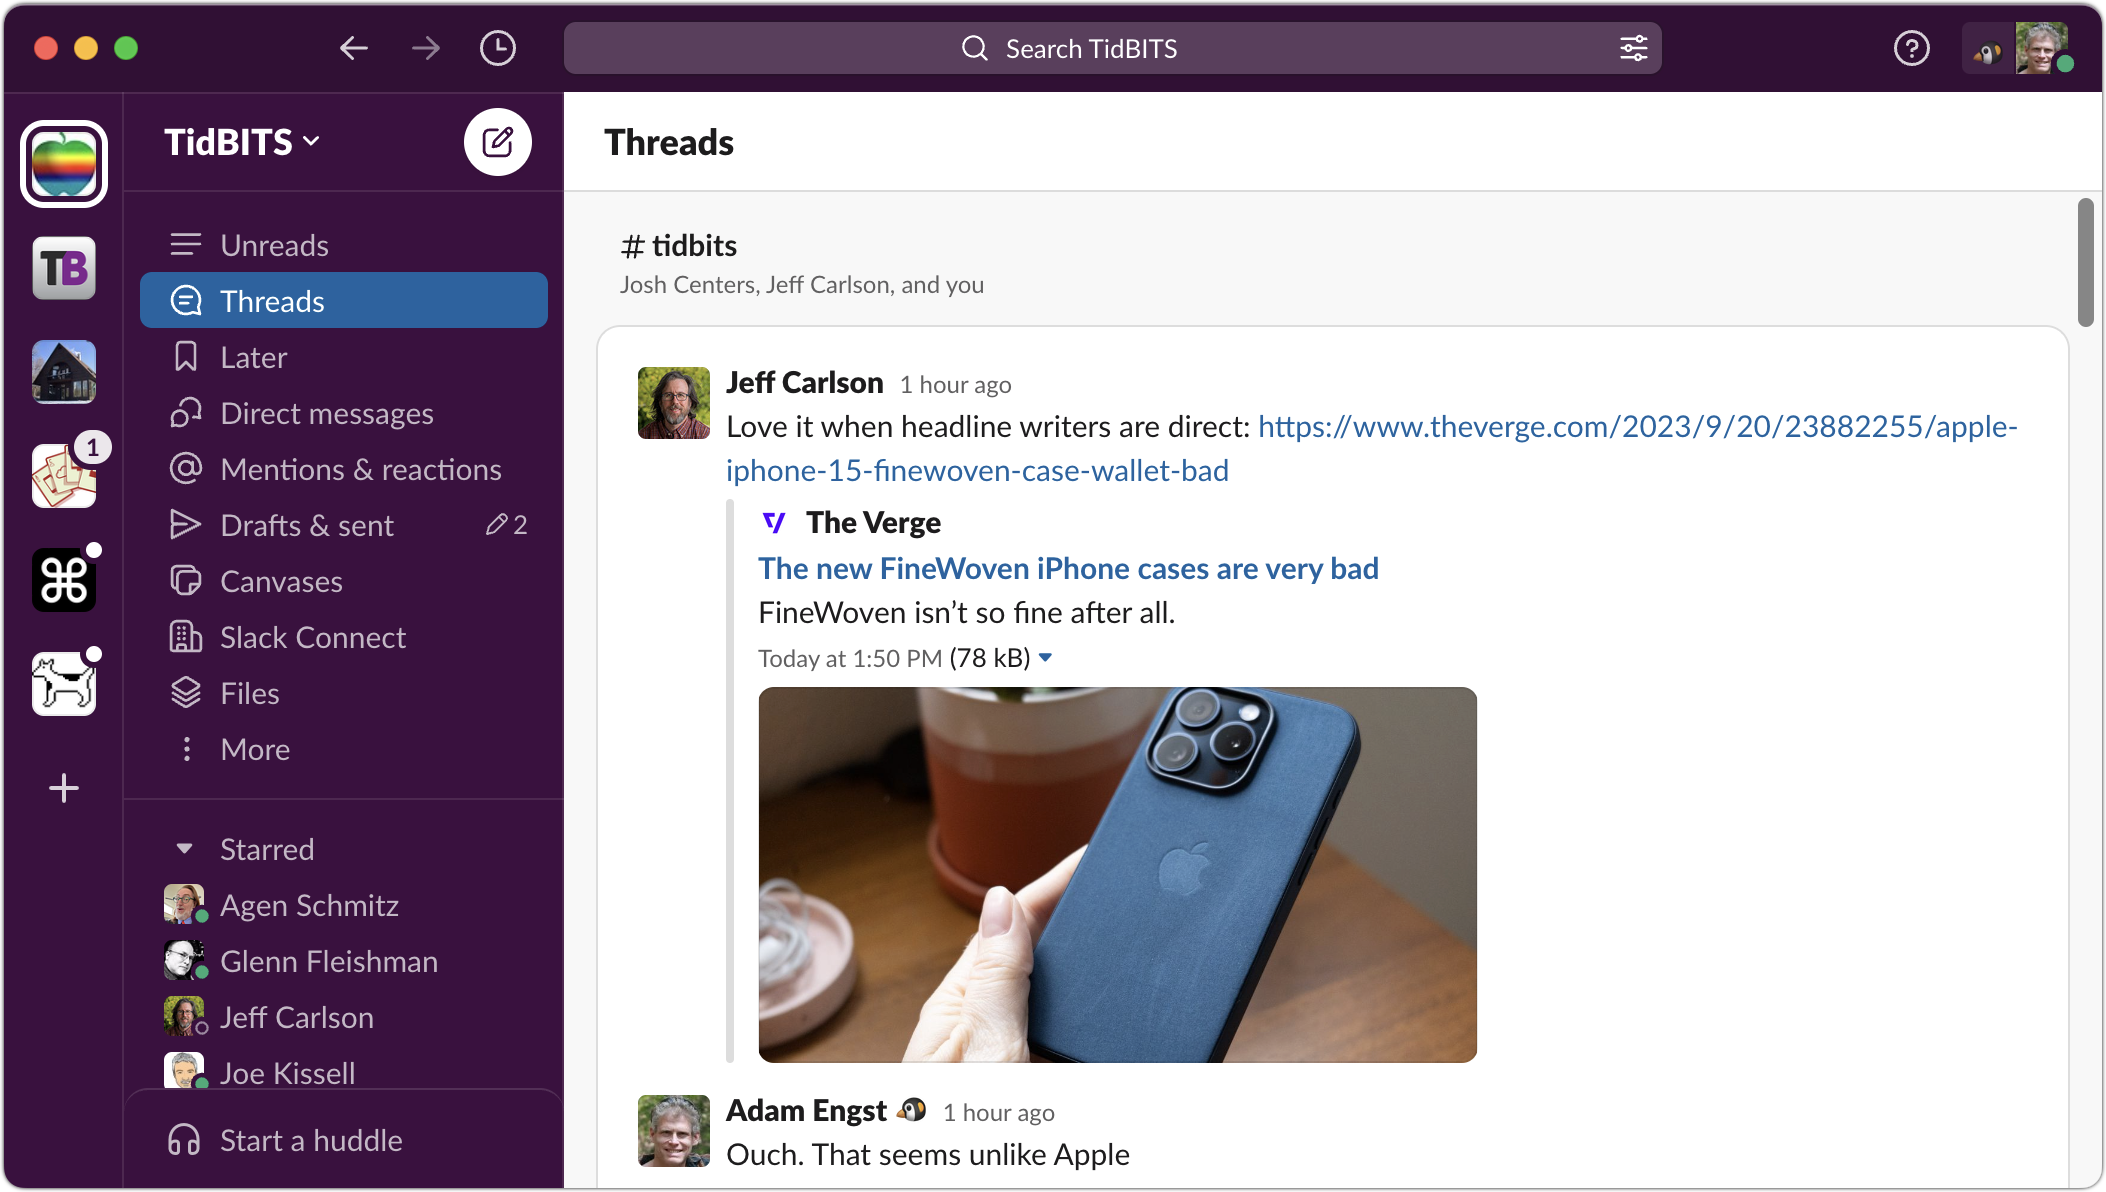 Old Slack user interface for the TidBITS workspace